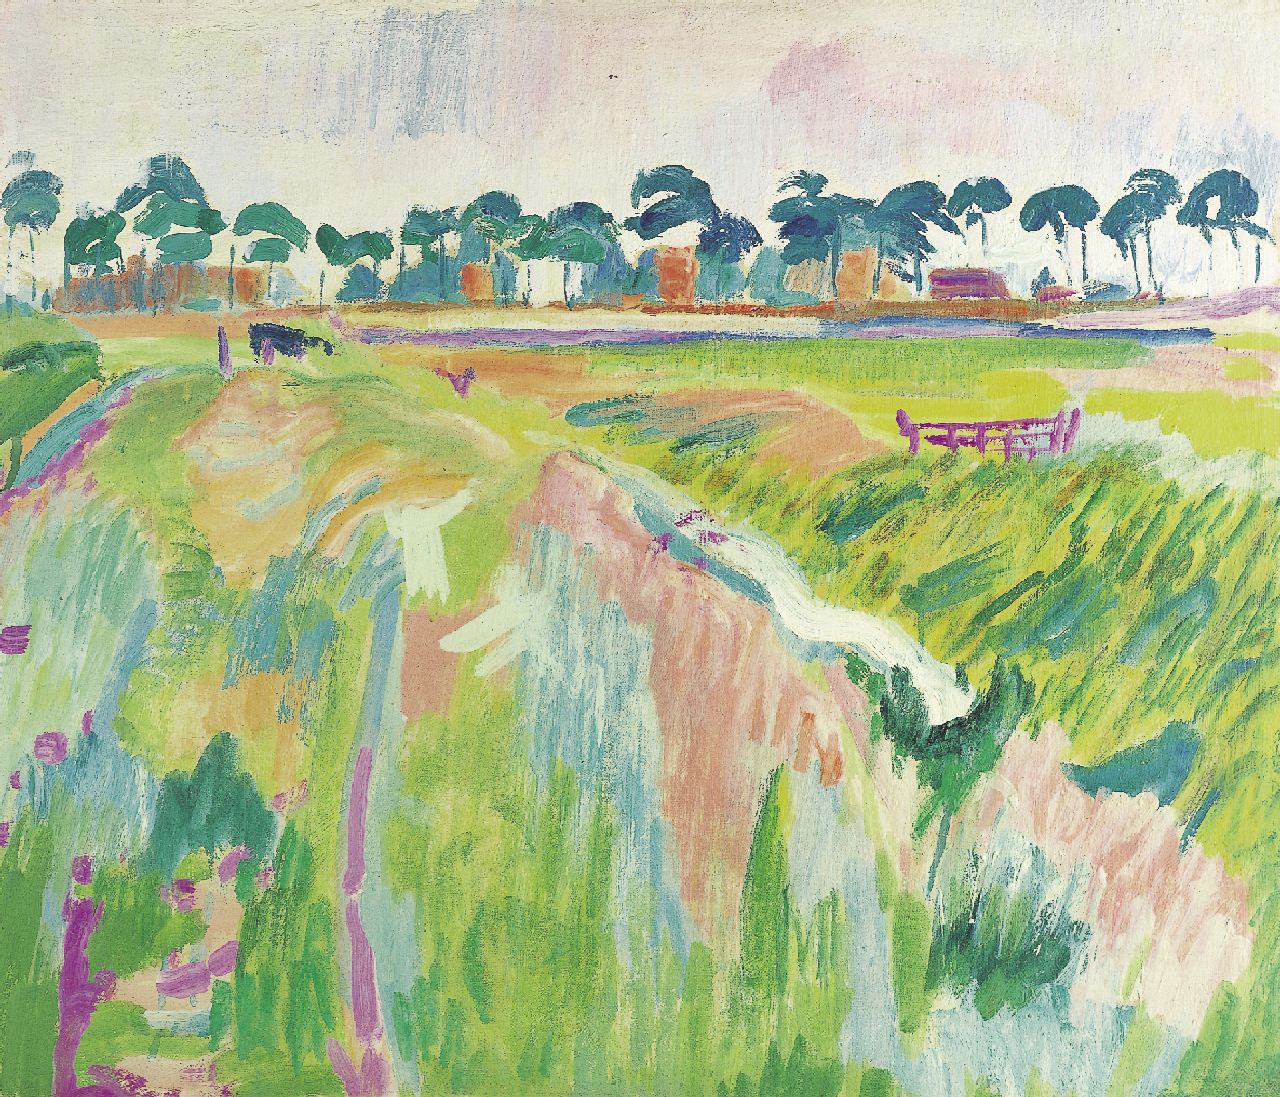 Altink J.  | Jan Altink, A landscape, Groningen, recto and verso, wax paint on canvas 51.5 x 60.2 cm, painted in 1926